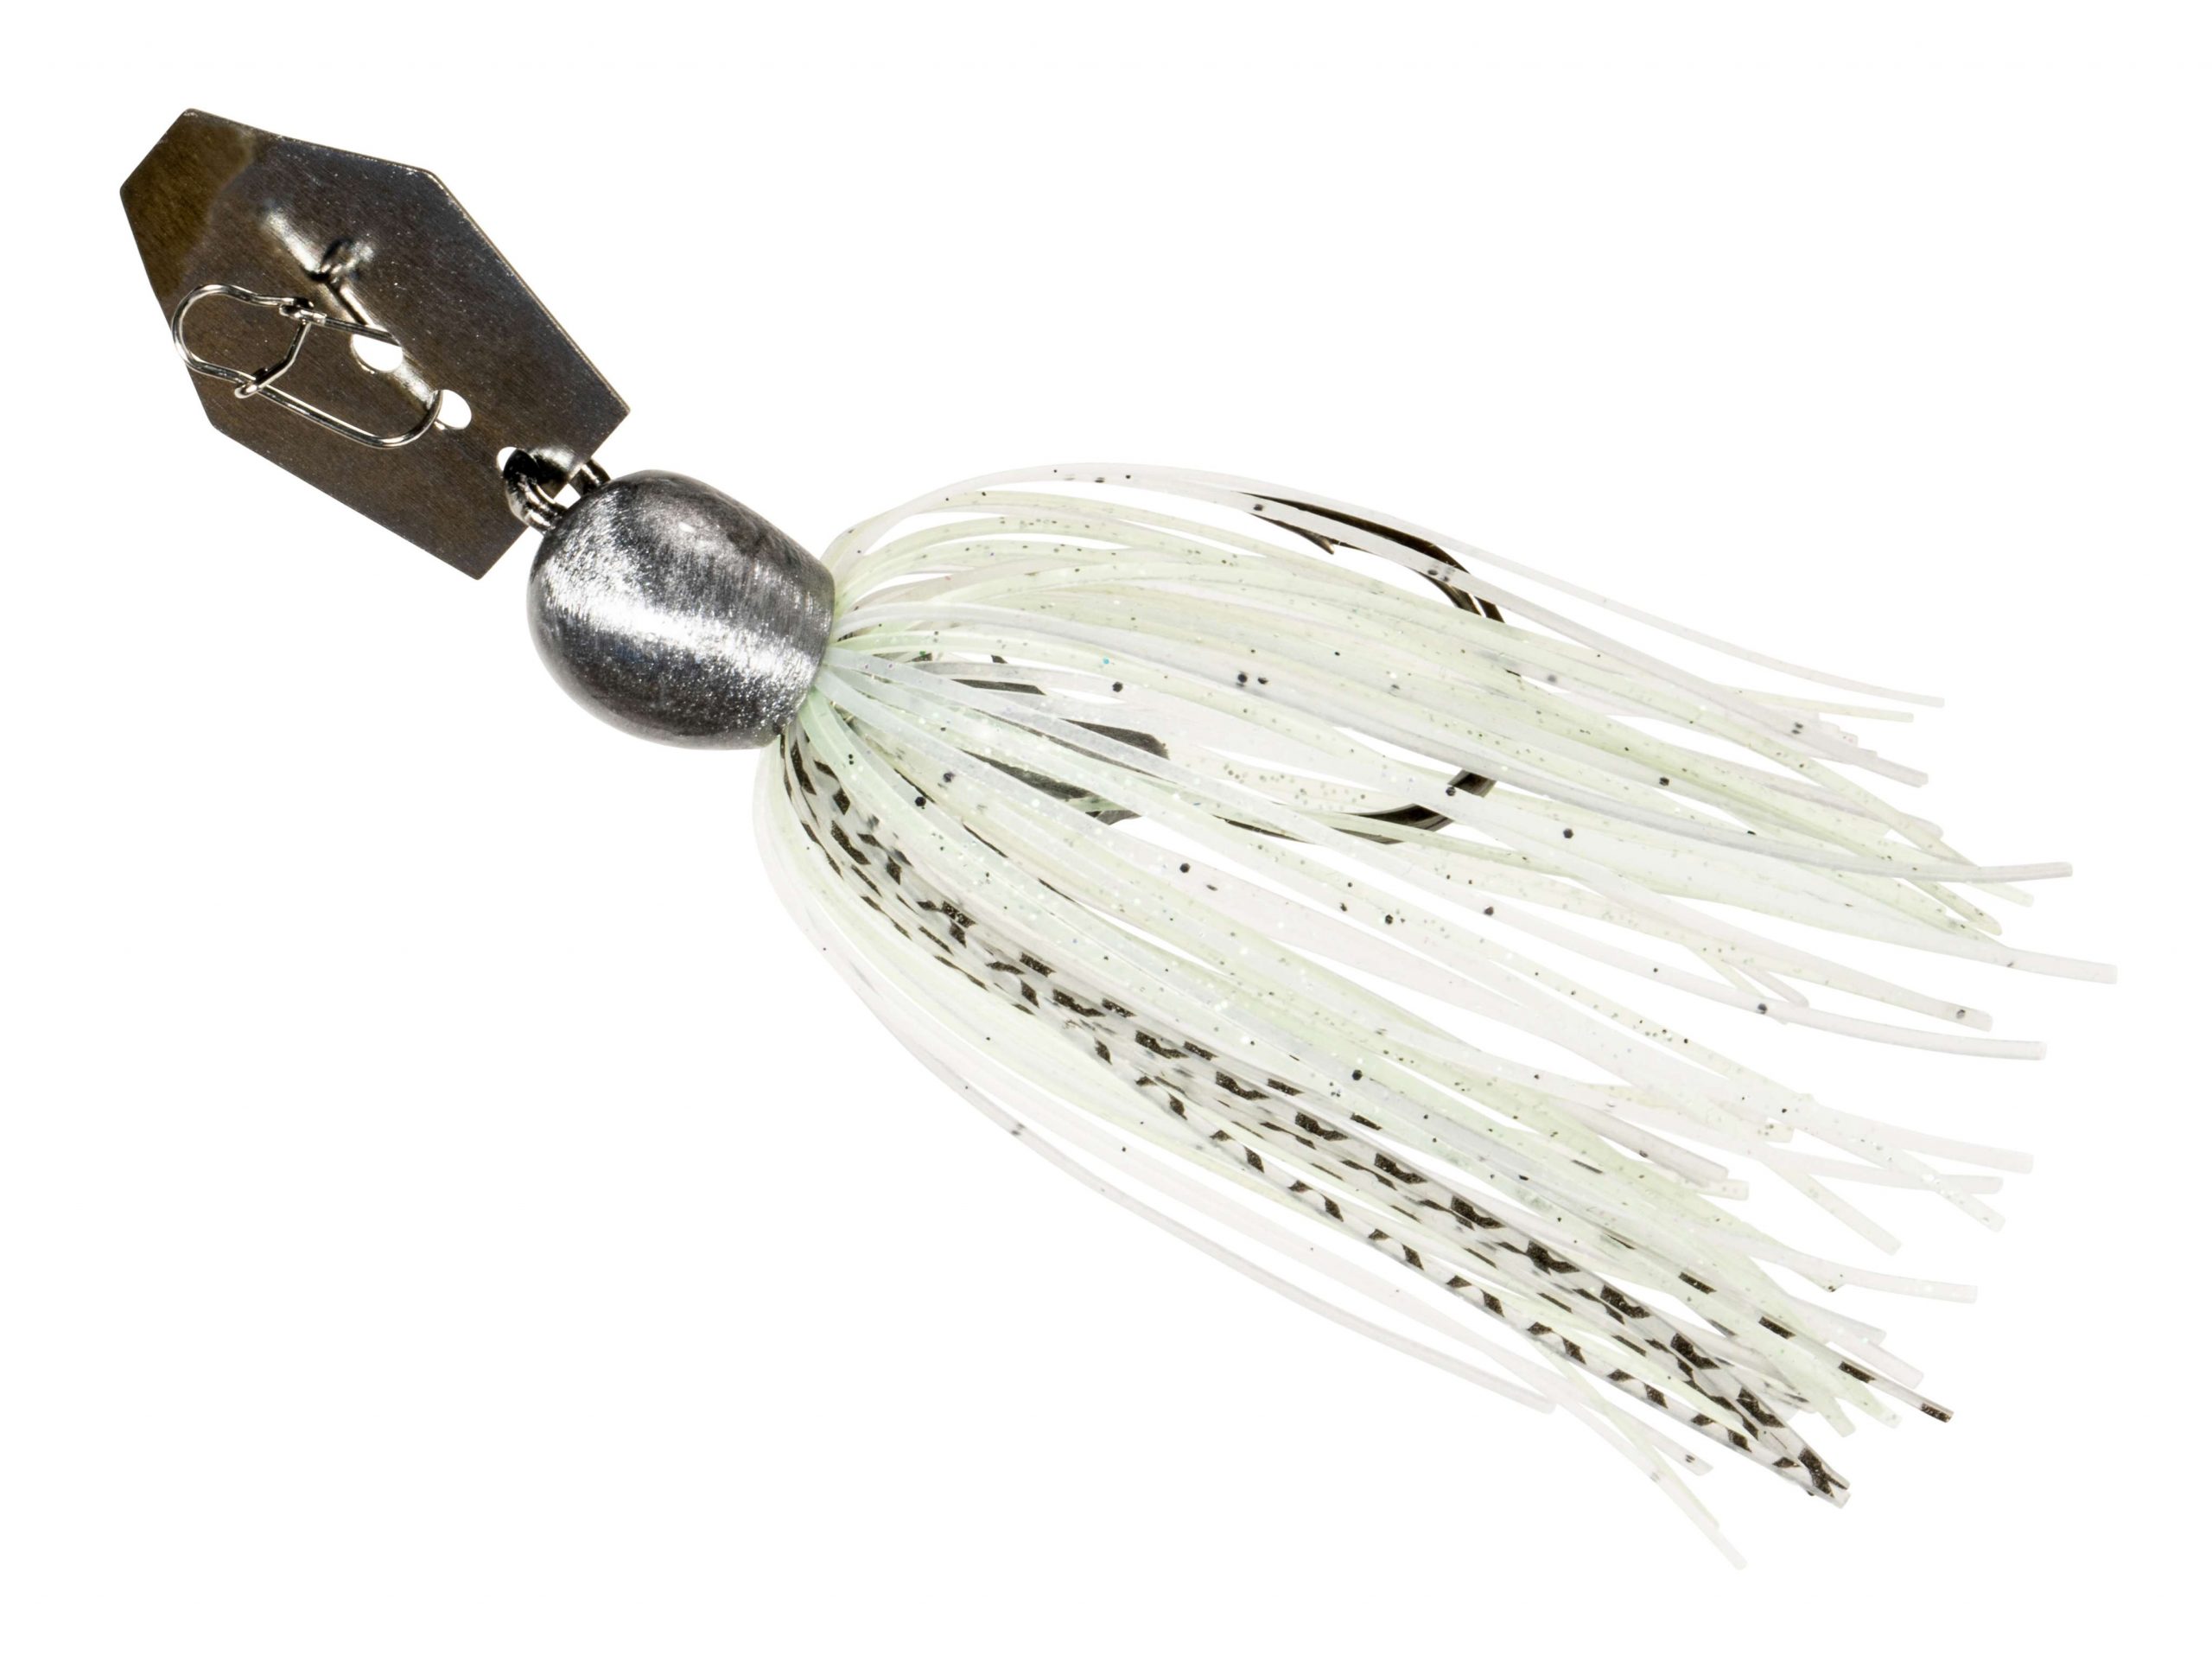 A special MiniMax shad pattern features a neutral, clear-coated jighead for high pressure or clear water situations.